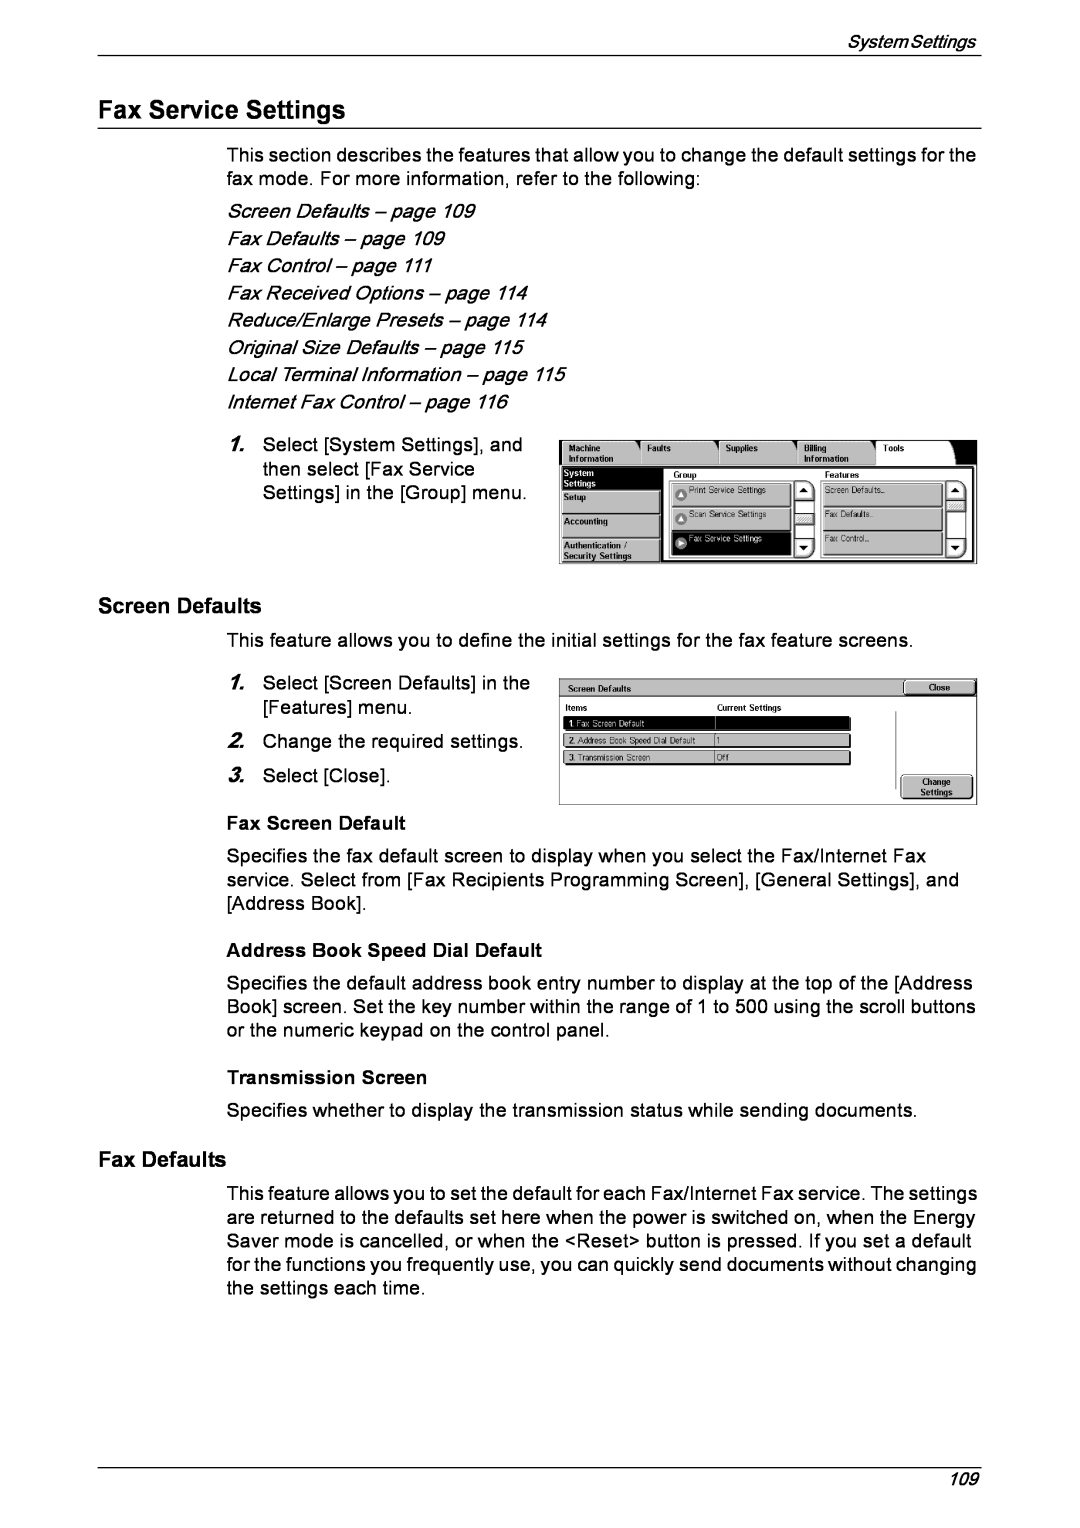 Xerox 5222 manual Fax Service Settings, Screen Defaults – page Fax Defaults – page, Reduce/Enlarge Presets – page 